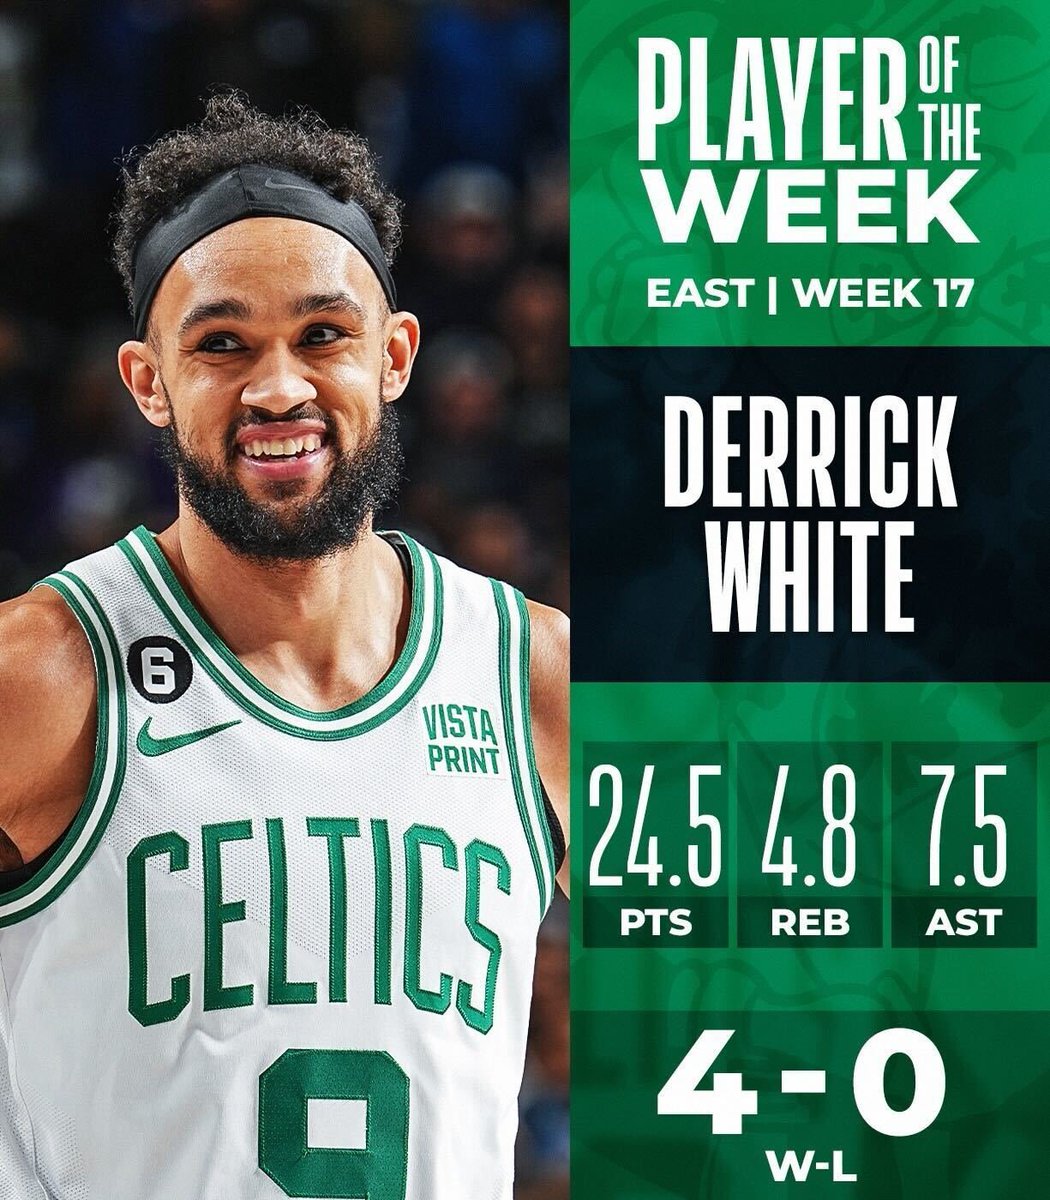 If this is the Derrick White the Celtics are getting this year….league better watch out.